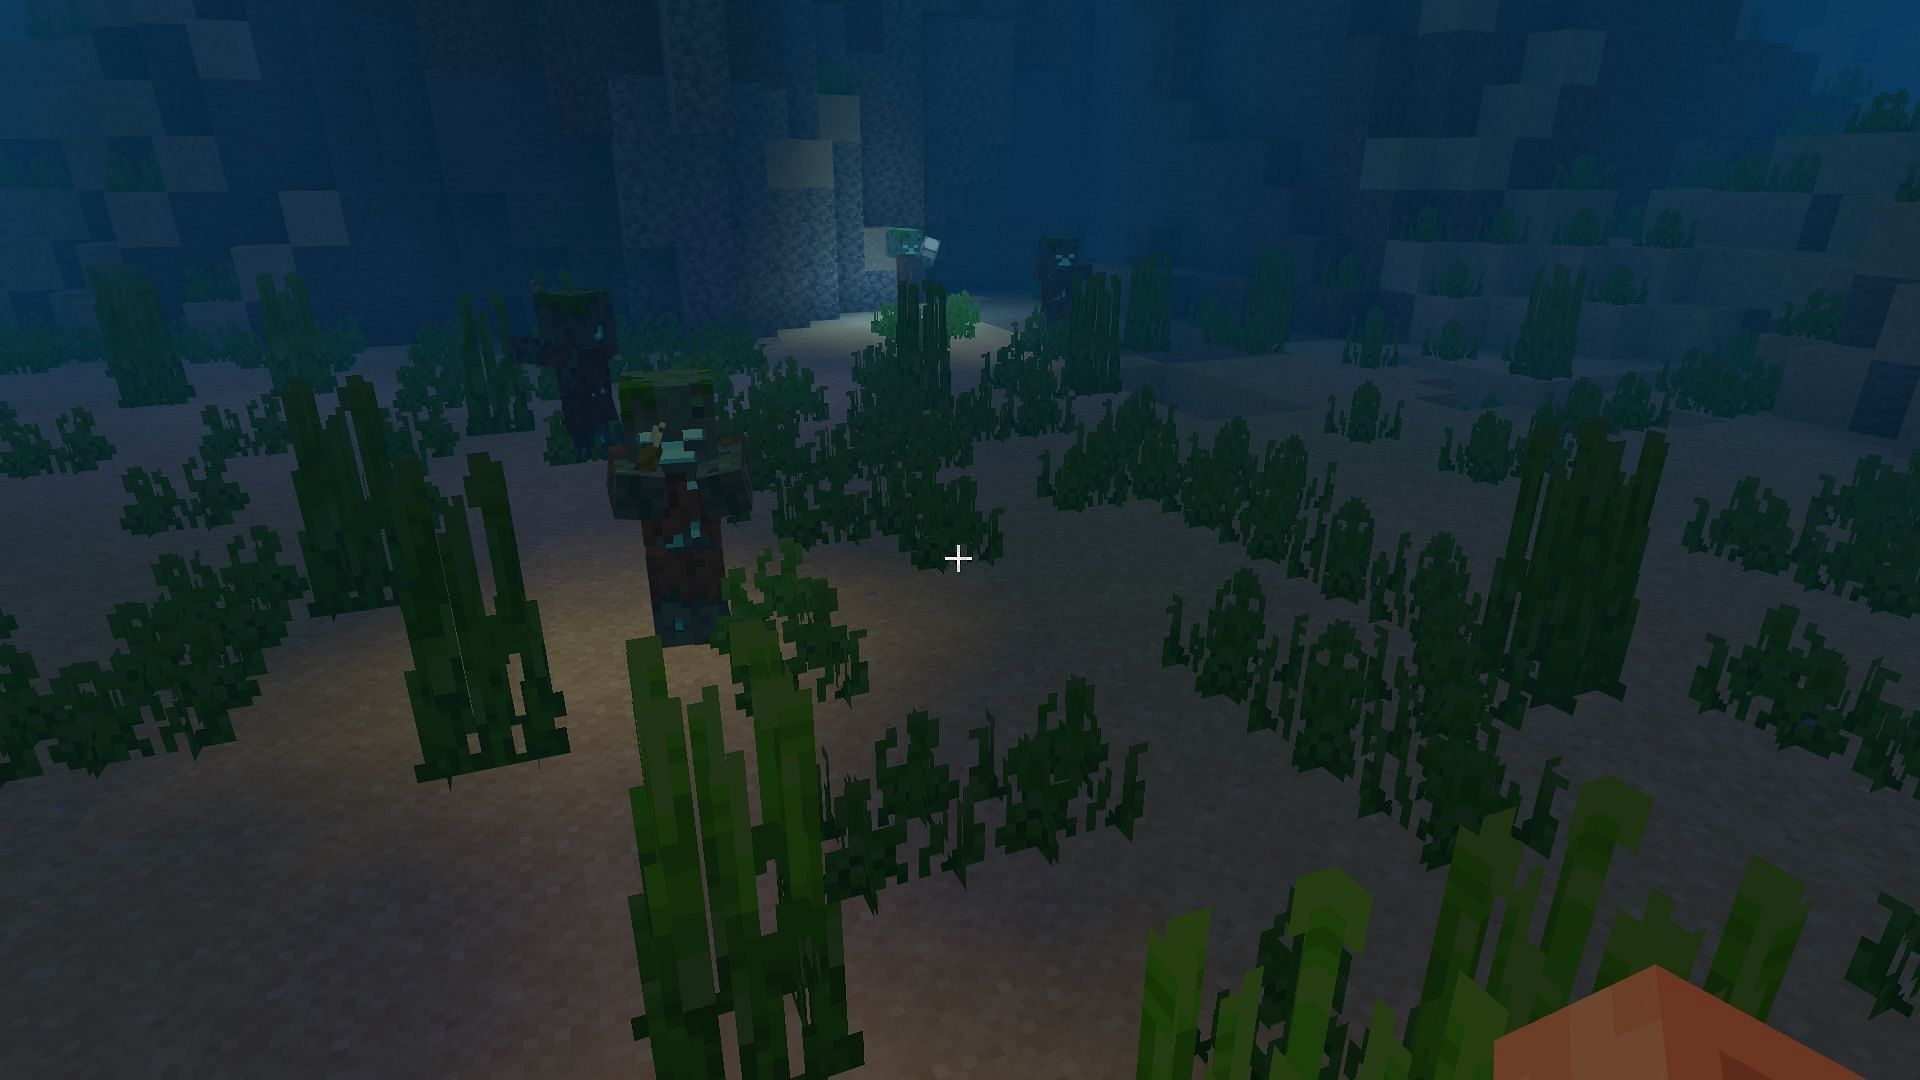 Drowned Zombies holding light emitting items in the game (Image via CurseForge)